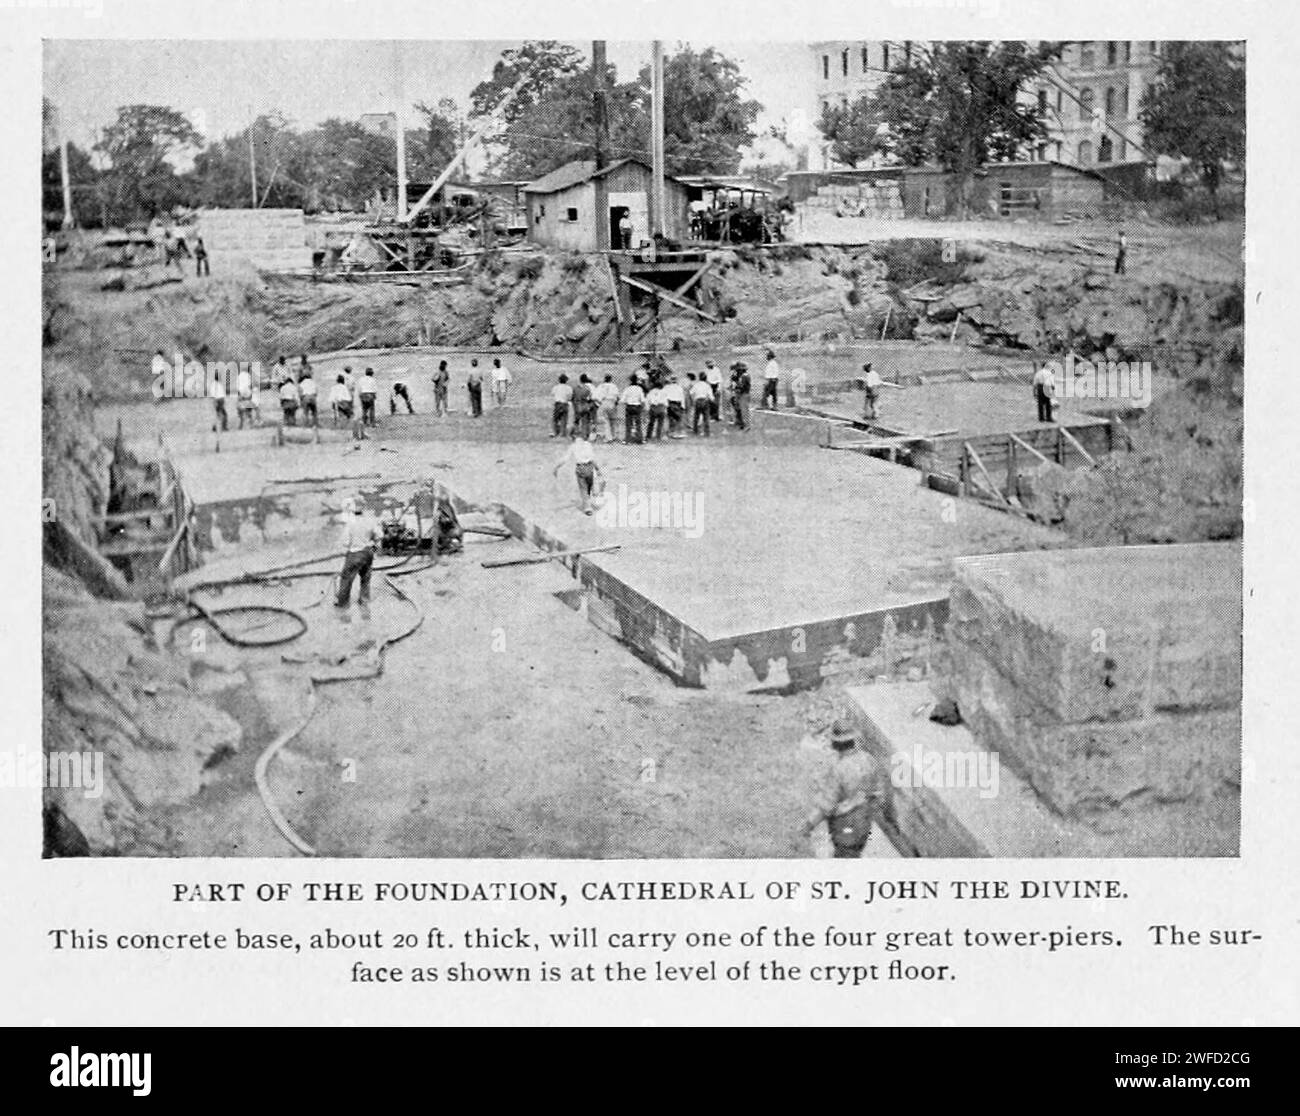 PART OF THE FOUNDATION, Cathedral of St. JOHN THE DIVINE. This concrete base, about 20 ft. thick, will carry one of the four great tower-piers. The surface as shown is at the level of the crypt floor. from the Article FOUNDATION CONSTRUCTION FOR TALL BUILDINGS. By Charles Sooy smith. from The Engineering Magazine Devoted to Industrial Progress Volume XI October 1897 The Engineering Magazine Co Stock Photo